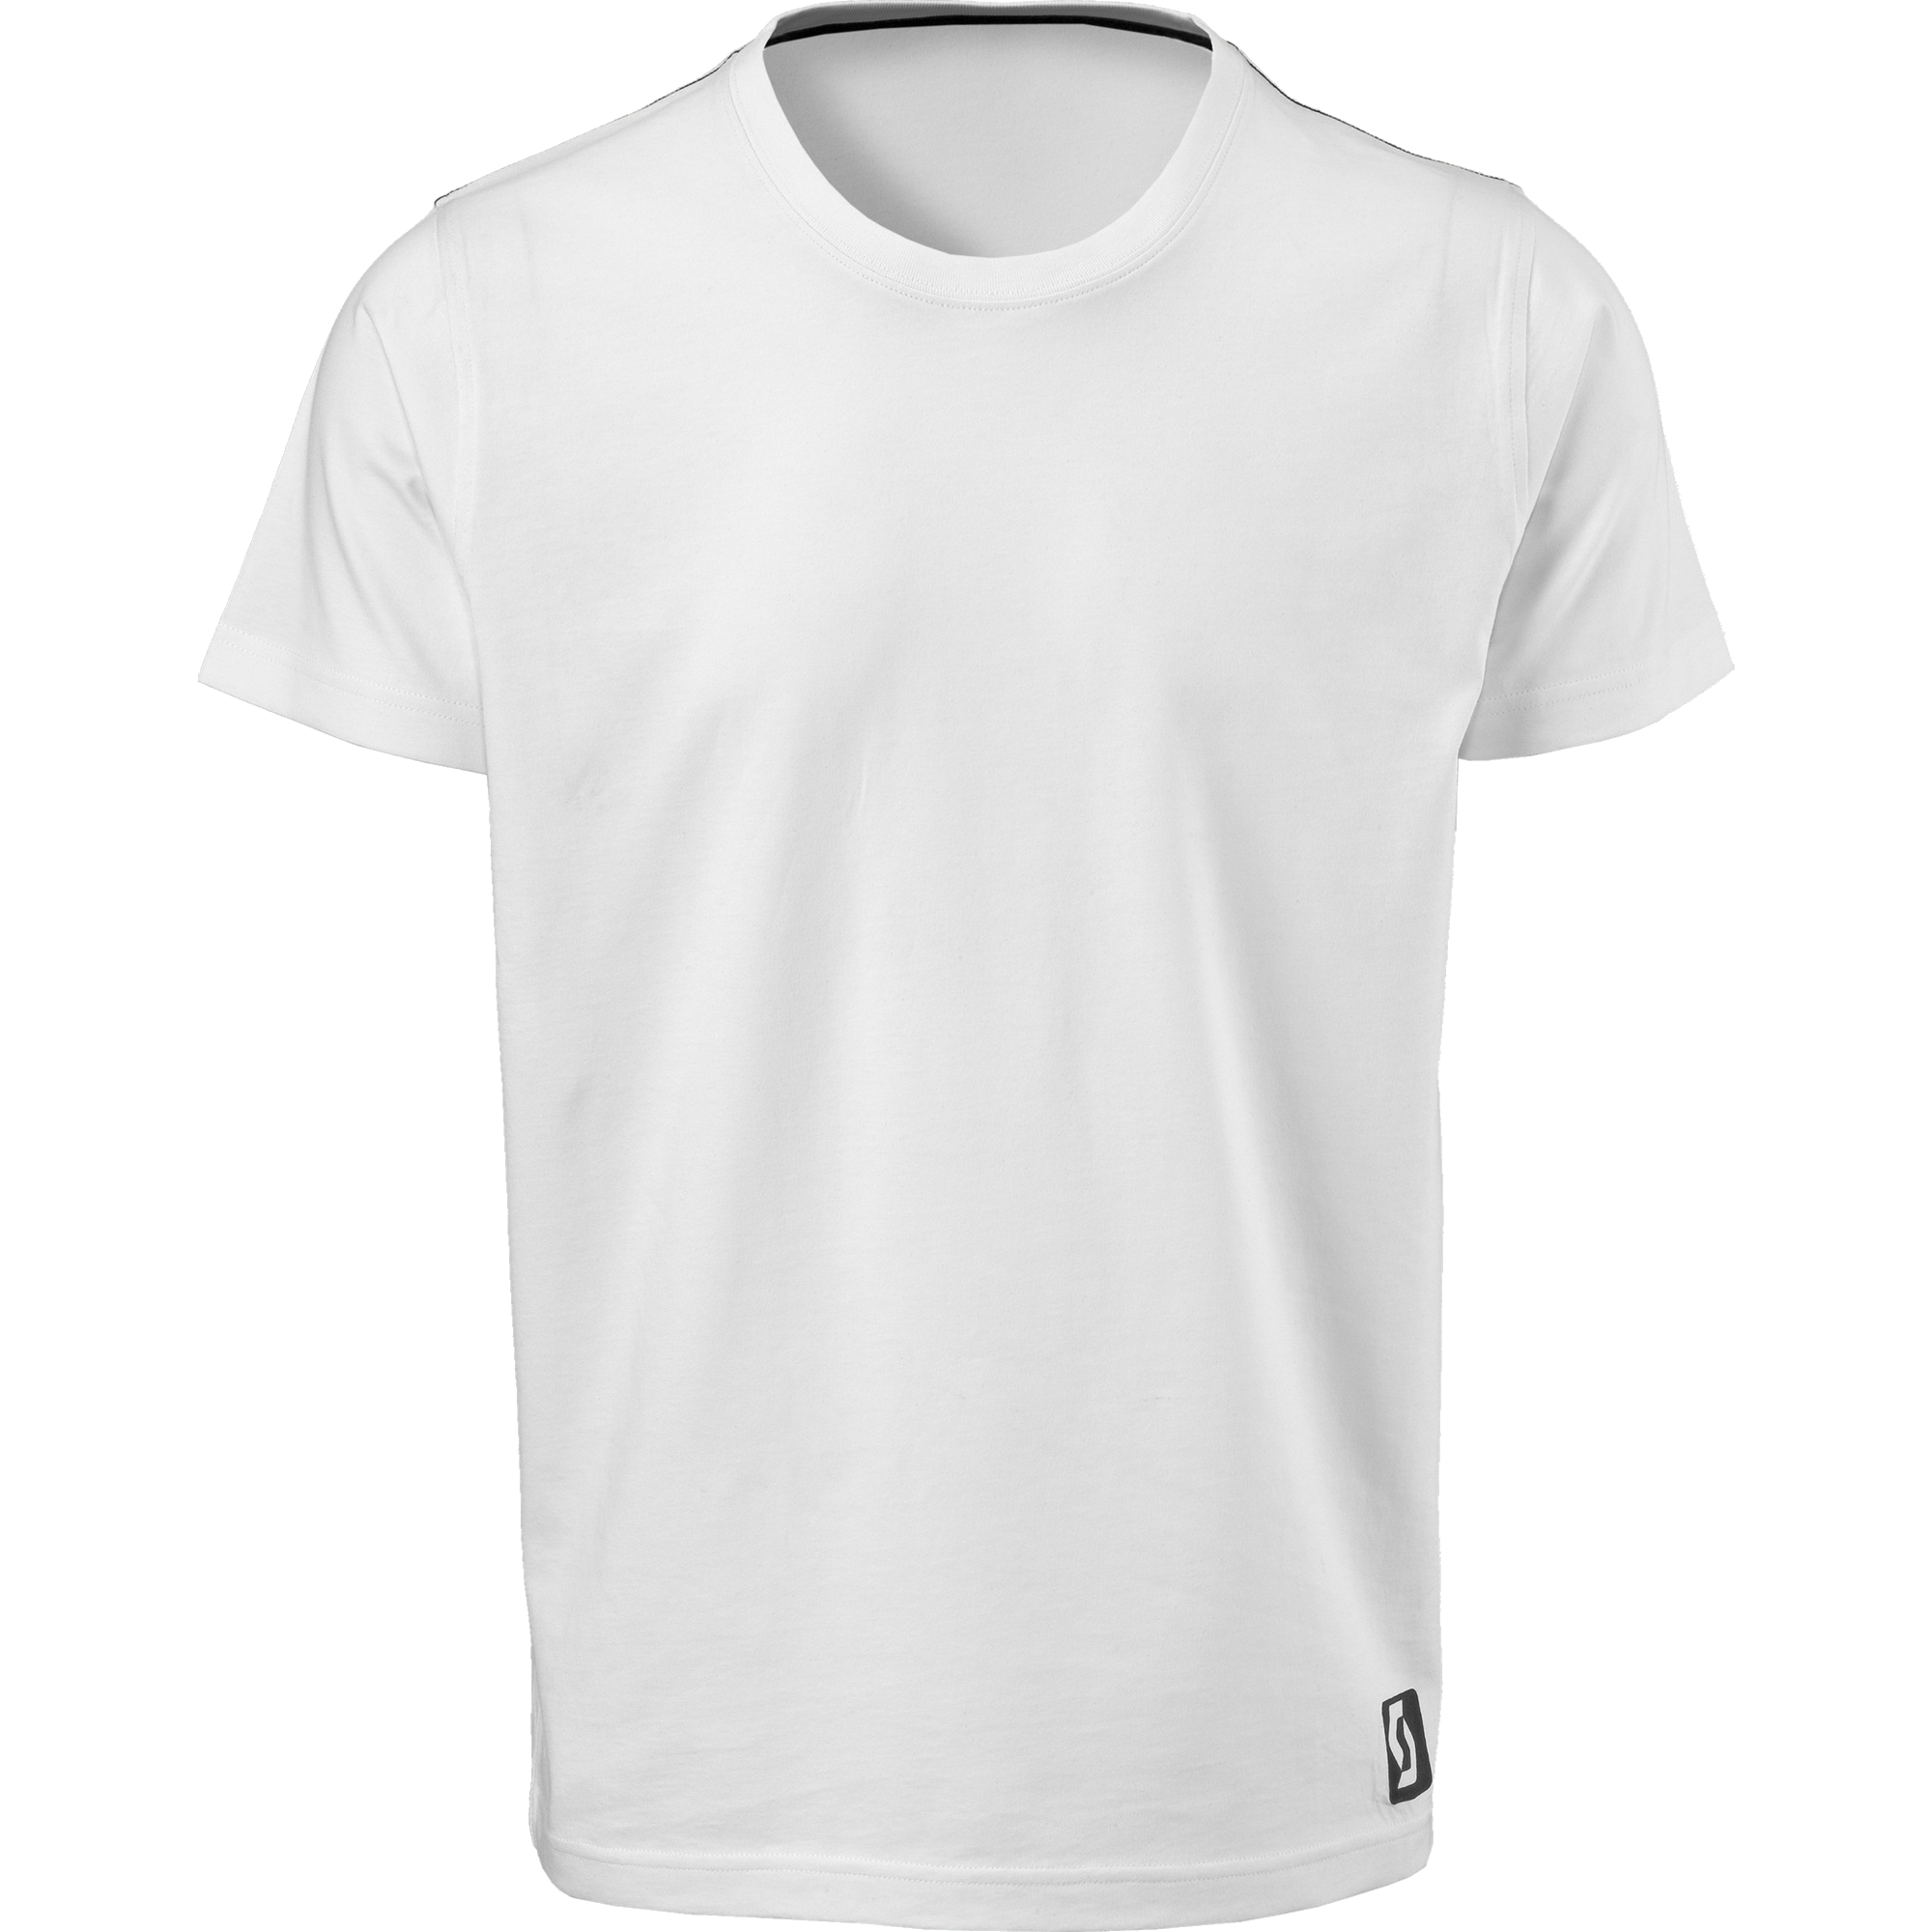 White T-Shirt PNG High-Quality Image